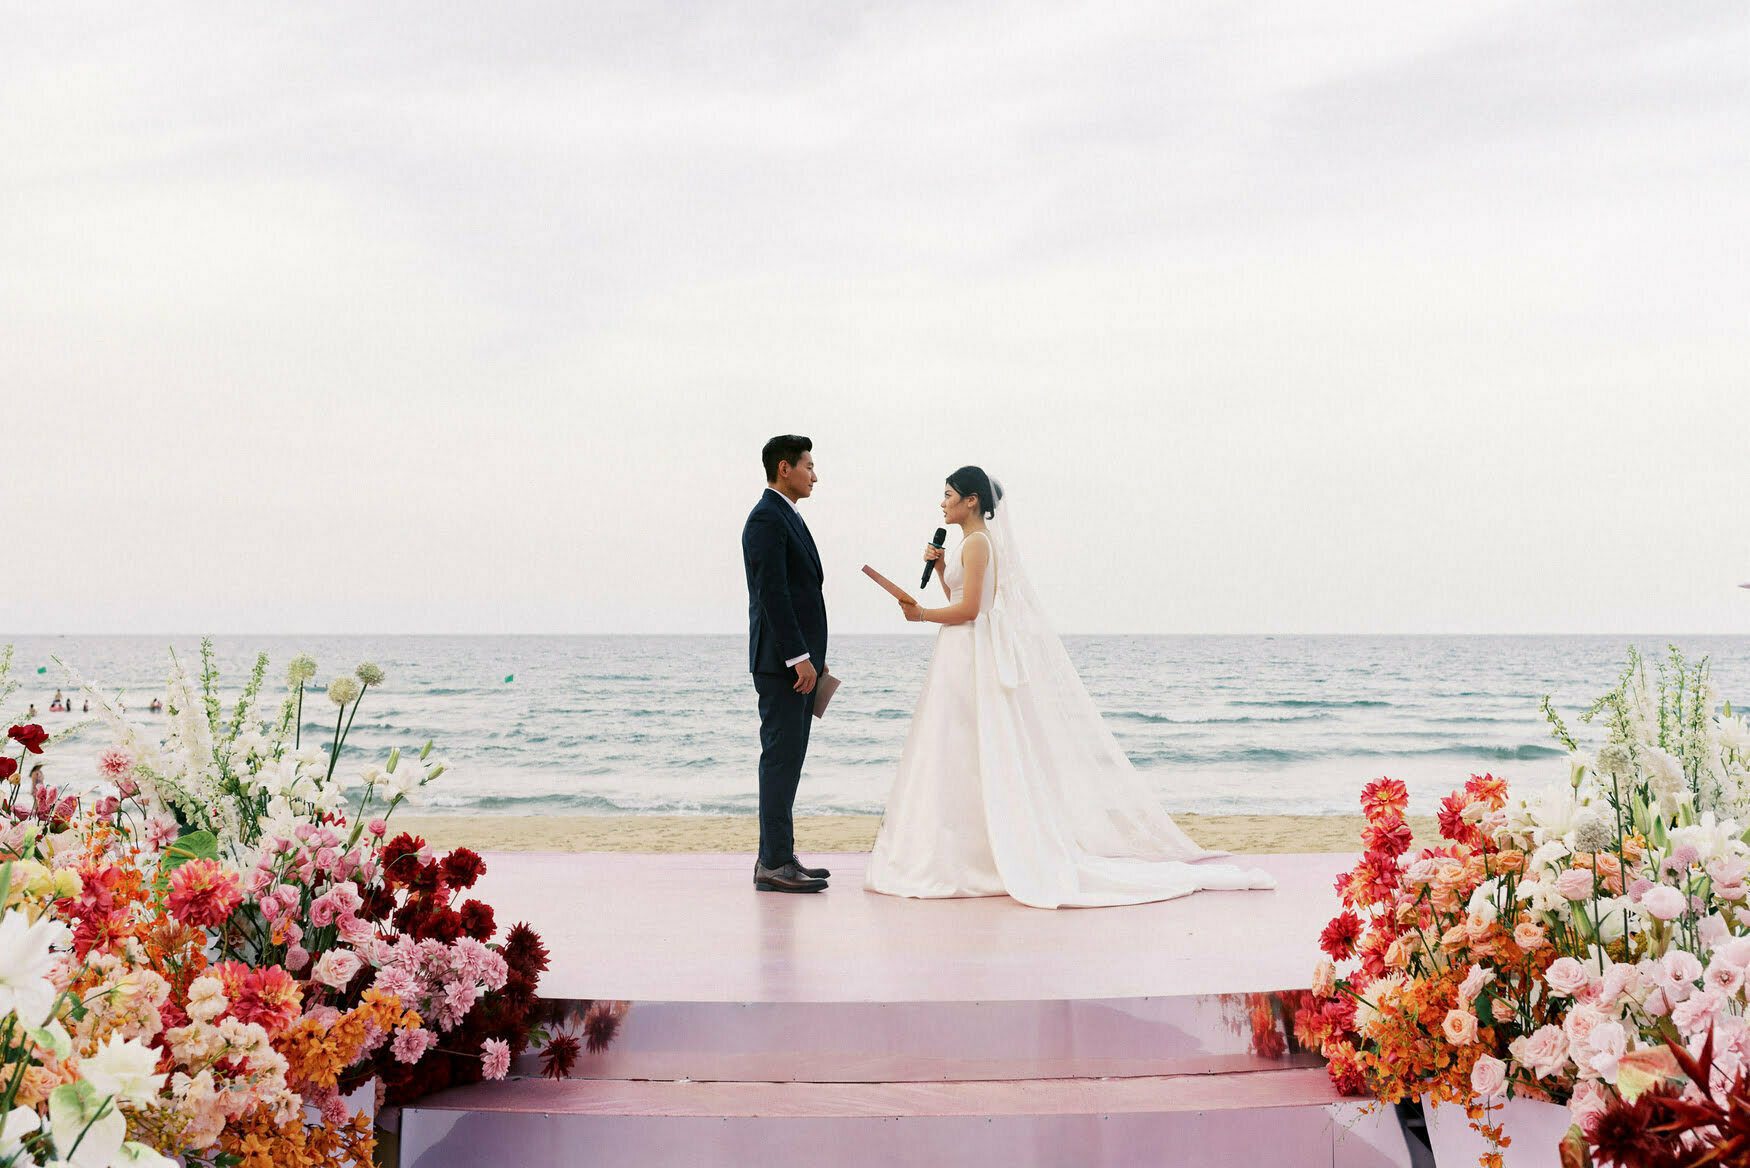 The romantic beach wedding of Huong and Phong